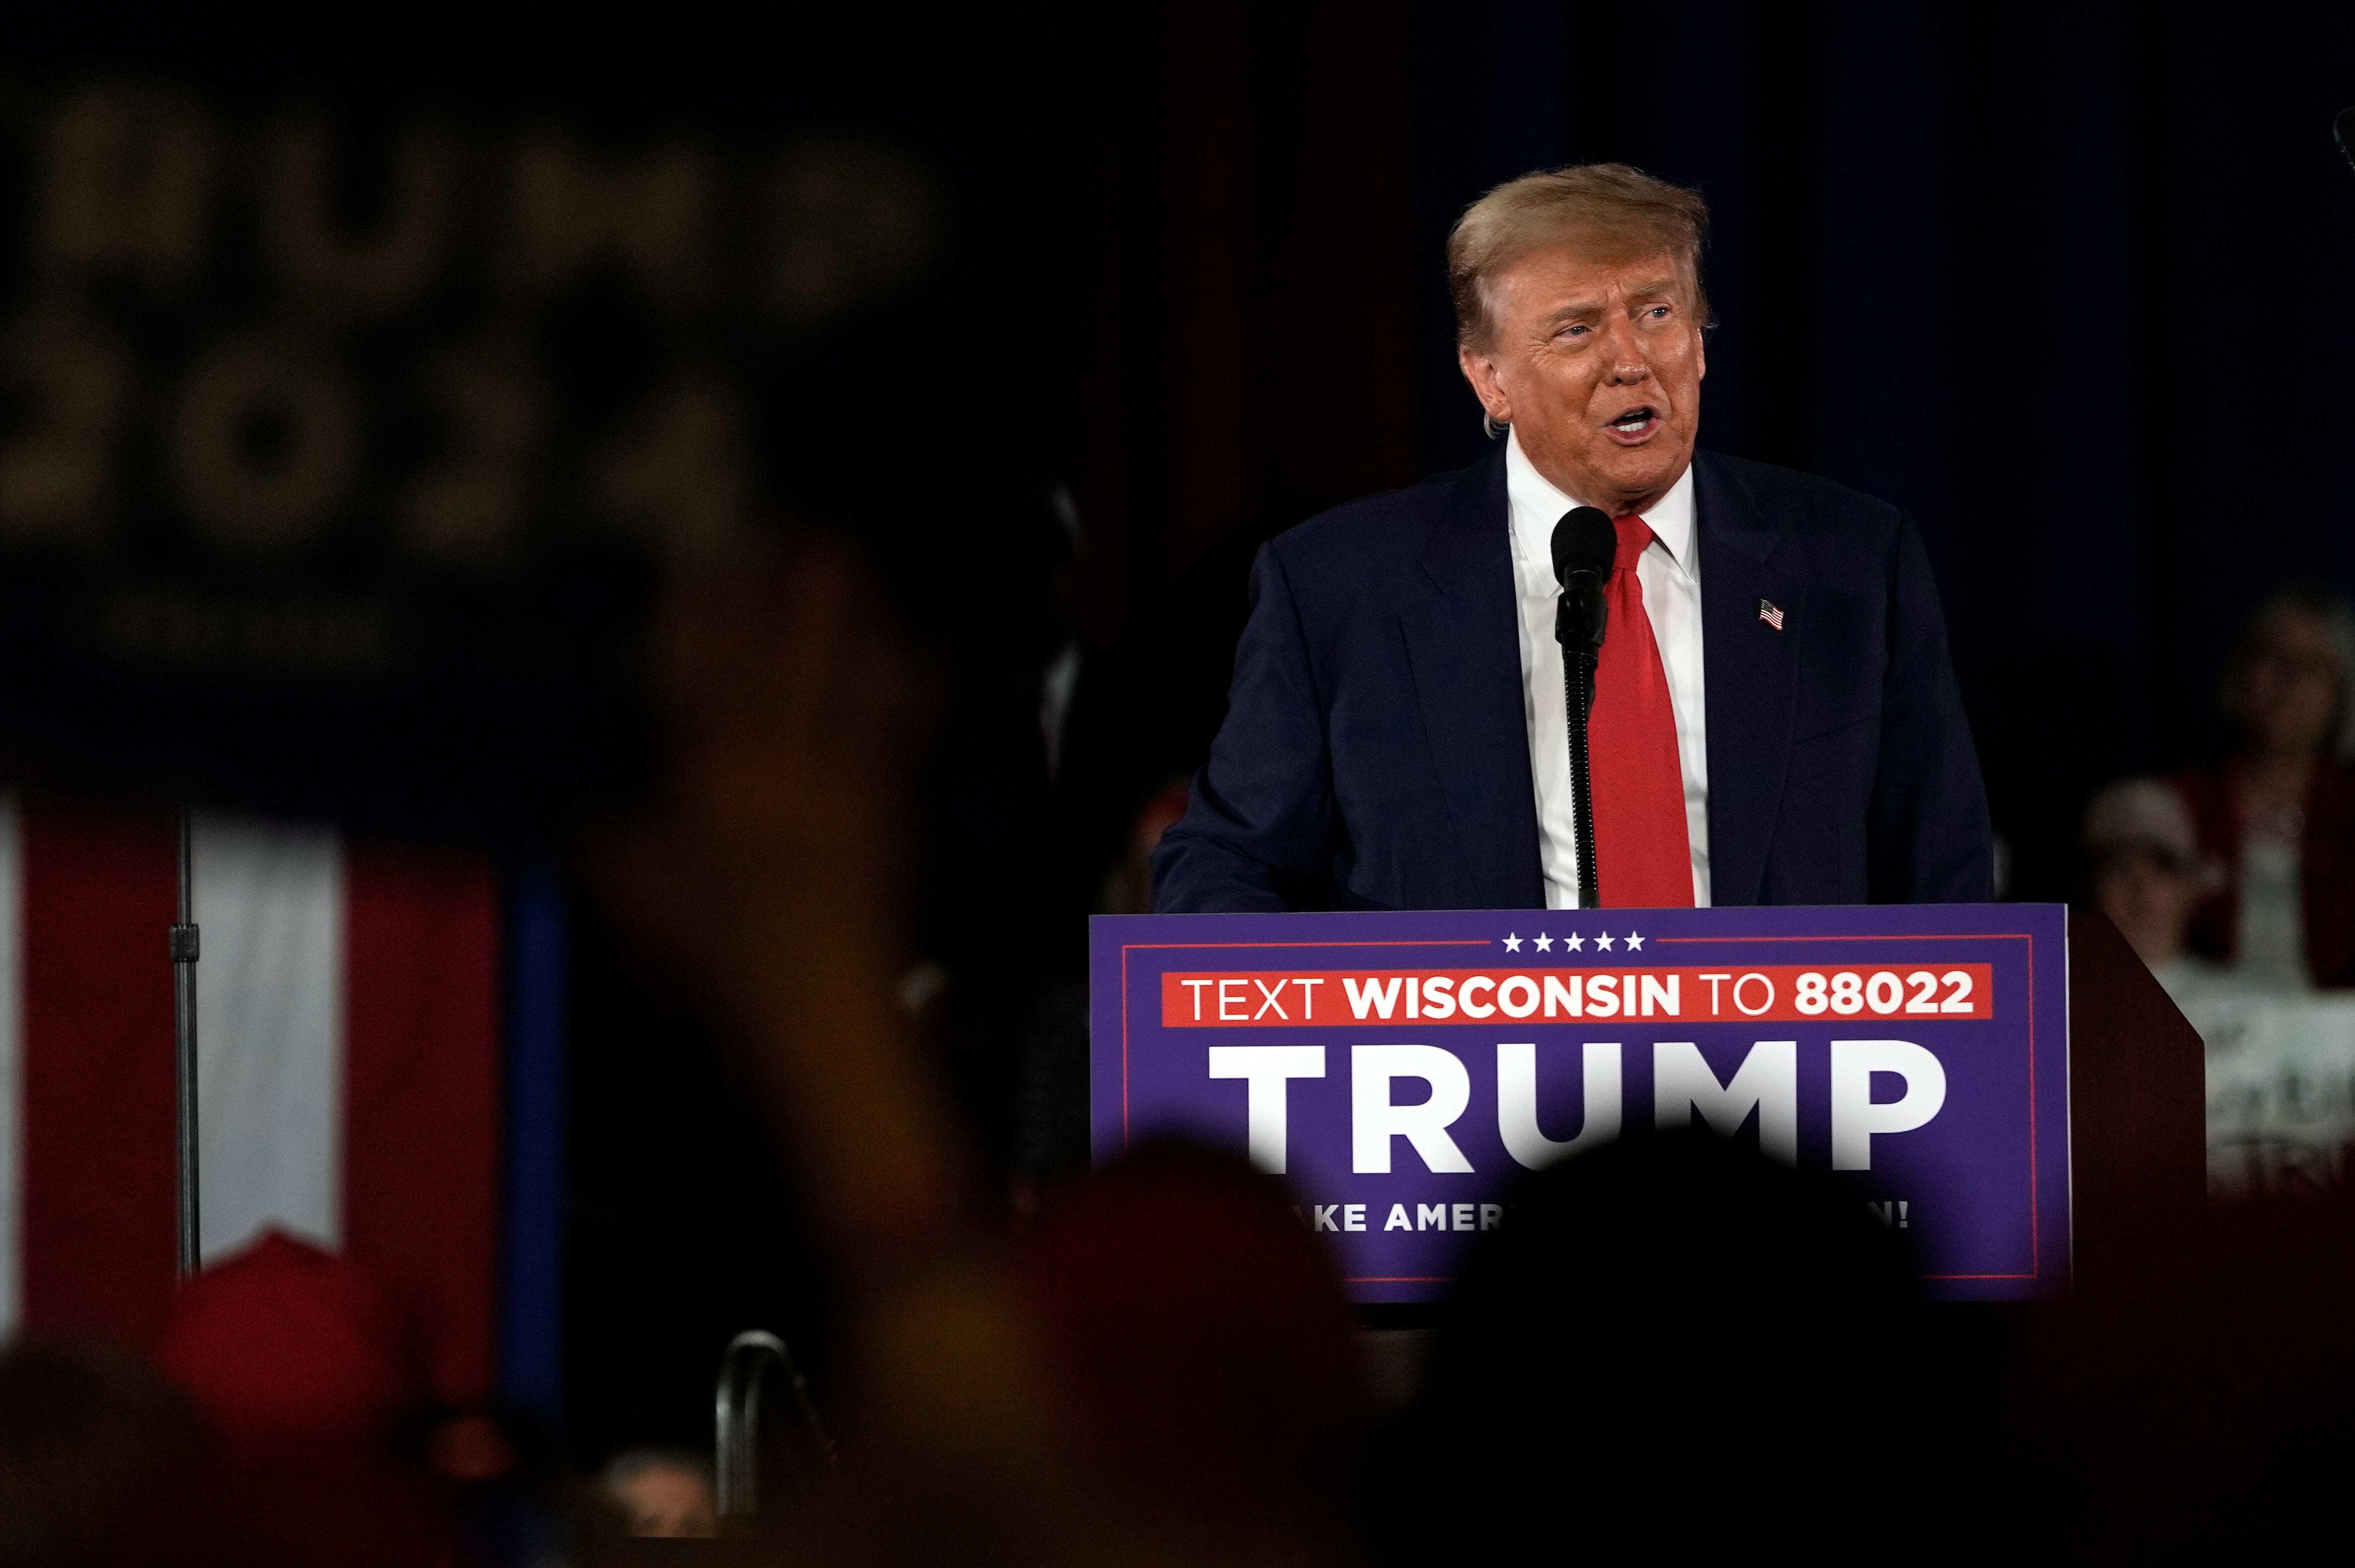 Republican presidential candidate former President Donald Trump speaks at a campaign rally on Wednesday in Waukesha, Wis. The Wisconsin campaign stop is his first official rally since the start of his trial in New York over campaign finance violations related to payments made to adult film actress Stormy Daniels.